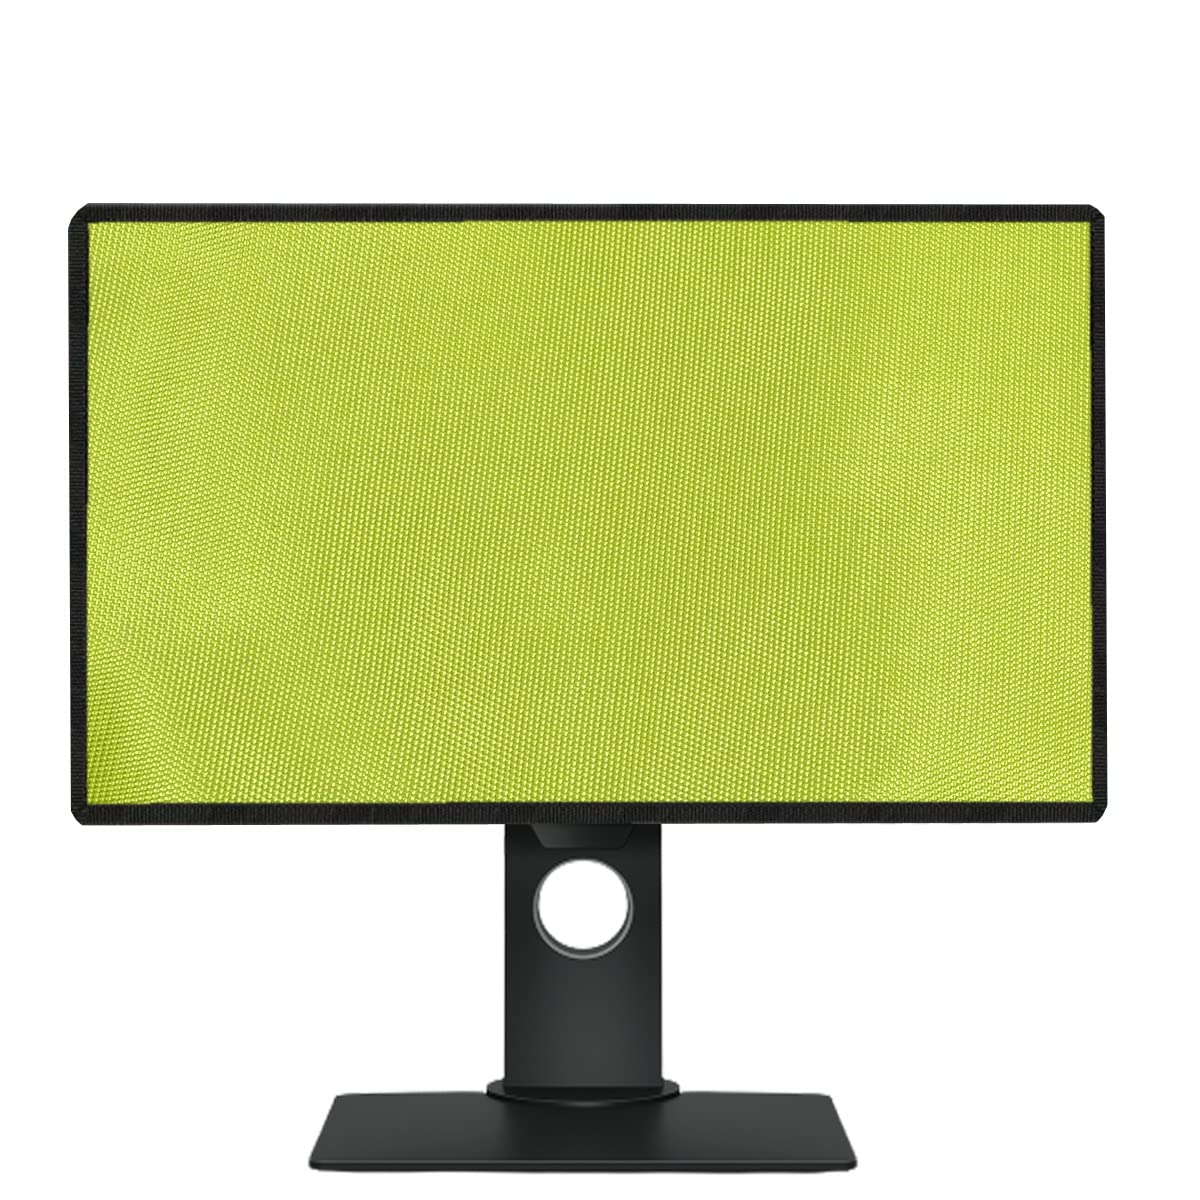 PalaP Super Premium Dust Proof Monitor Cover for BENQ 23.8 inches Monitor (Green)